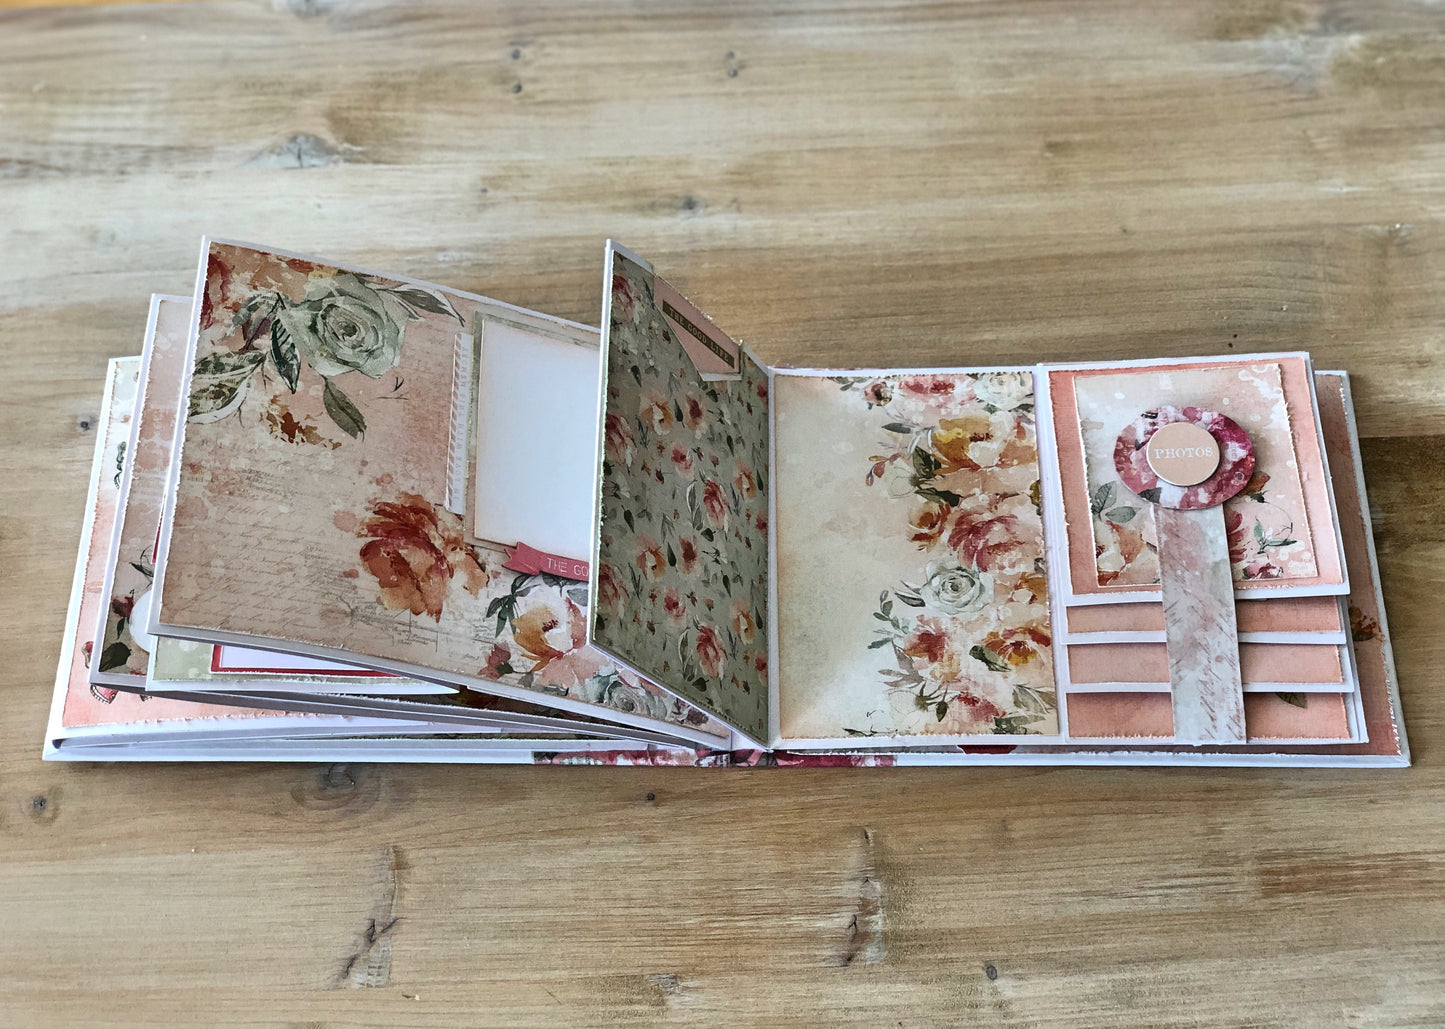 Hardcover Photo Album in a Vintage Floral Romantic style, Family Heirloom Gift for her, Decorated Junk Journal, Vacation Journal Scrapbook